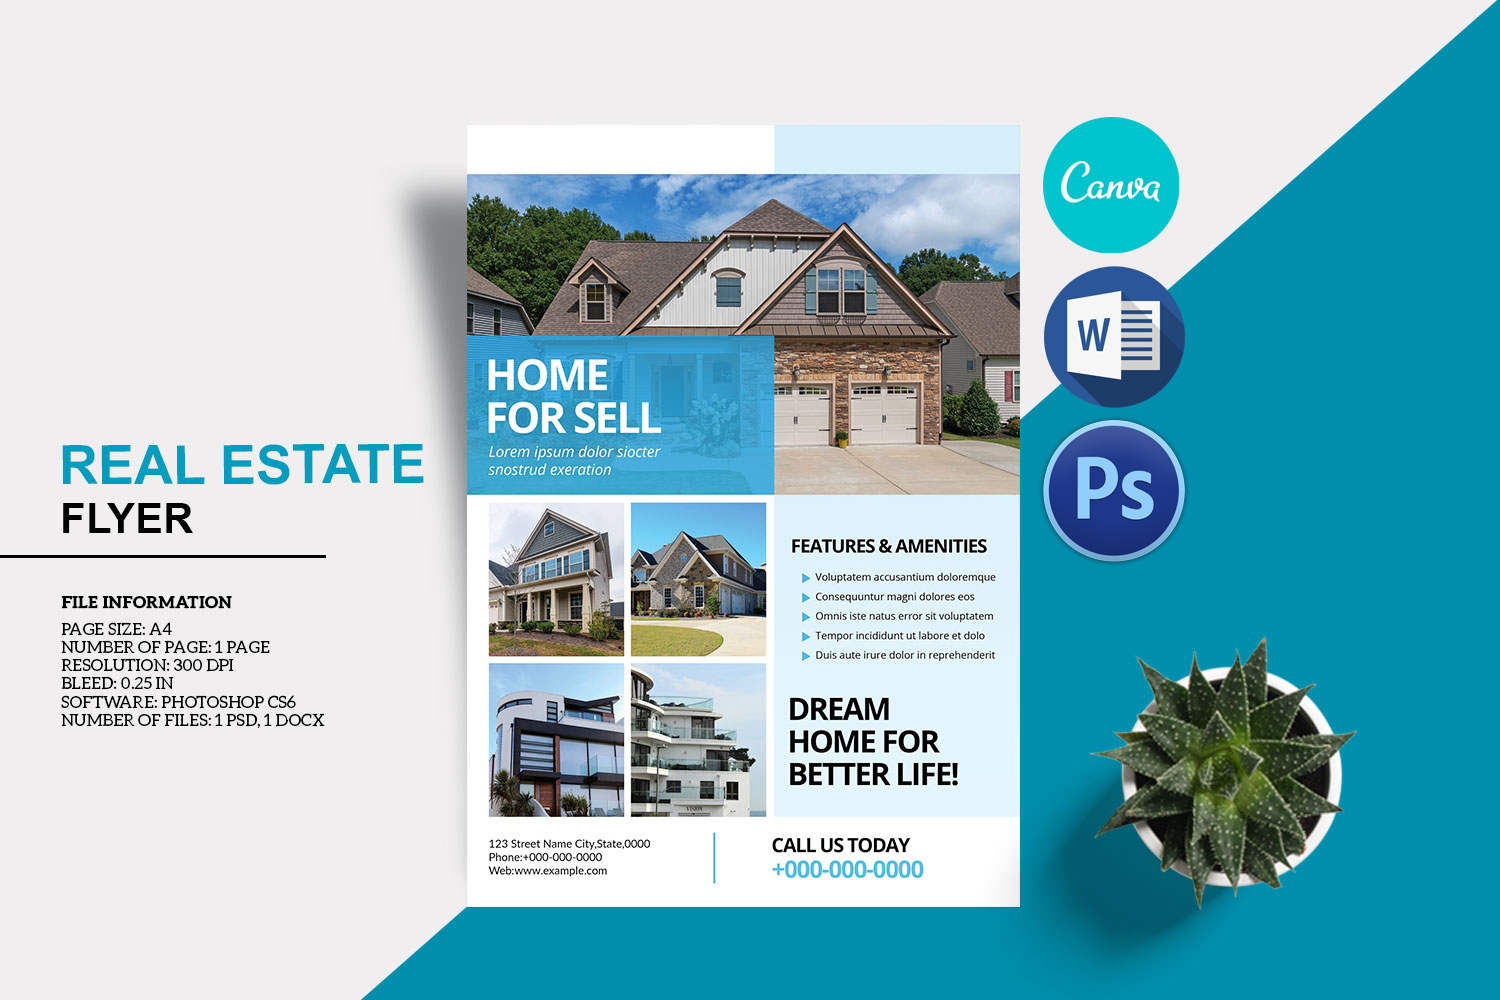 Real Estate Flyer Template. Canva, Ms word and Photoshop template